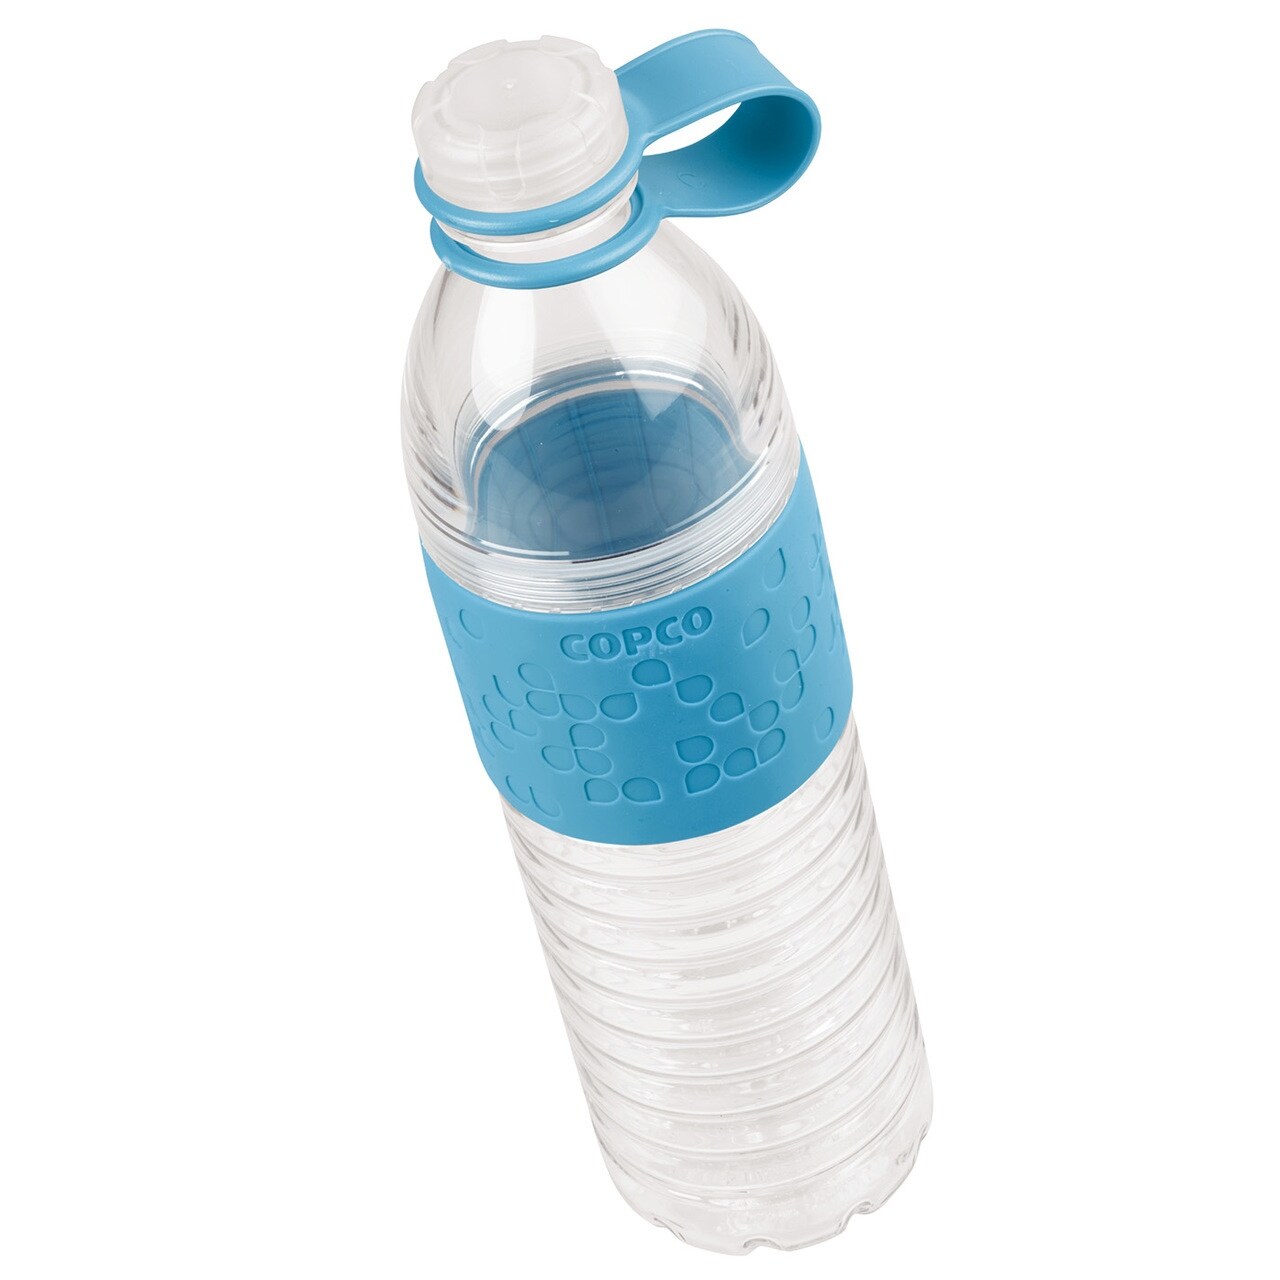 https://ak1.ostkcdn.com/images/products/is/images/direct/515ad0fabef0edc19ff4f43d804782e426c0e674/2-Pack-Copco-Hydra-Sports-Water-Bottle-Non-Slip-Sleeve-BPA-Free-20-Oz%2C-Gray-Blue.jpg